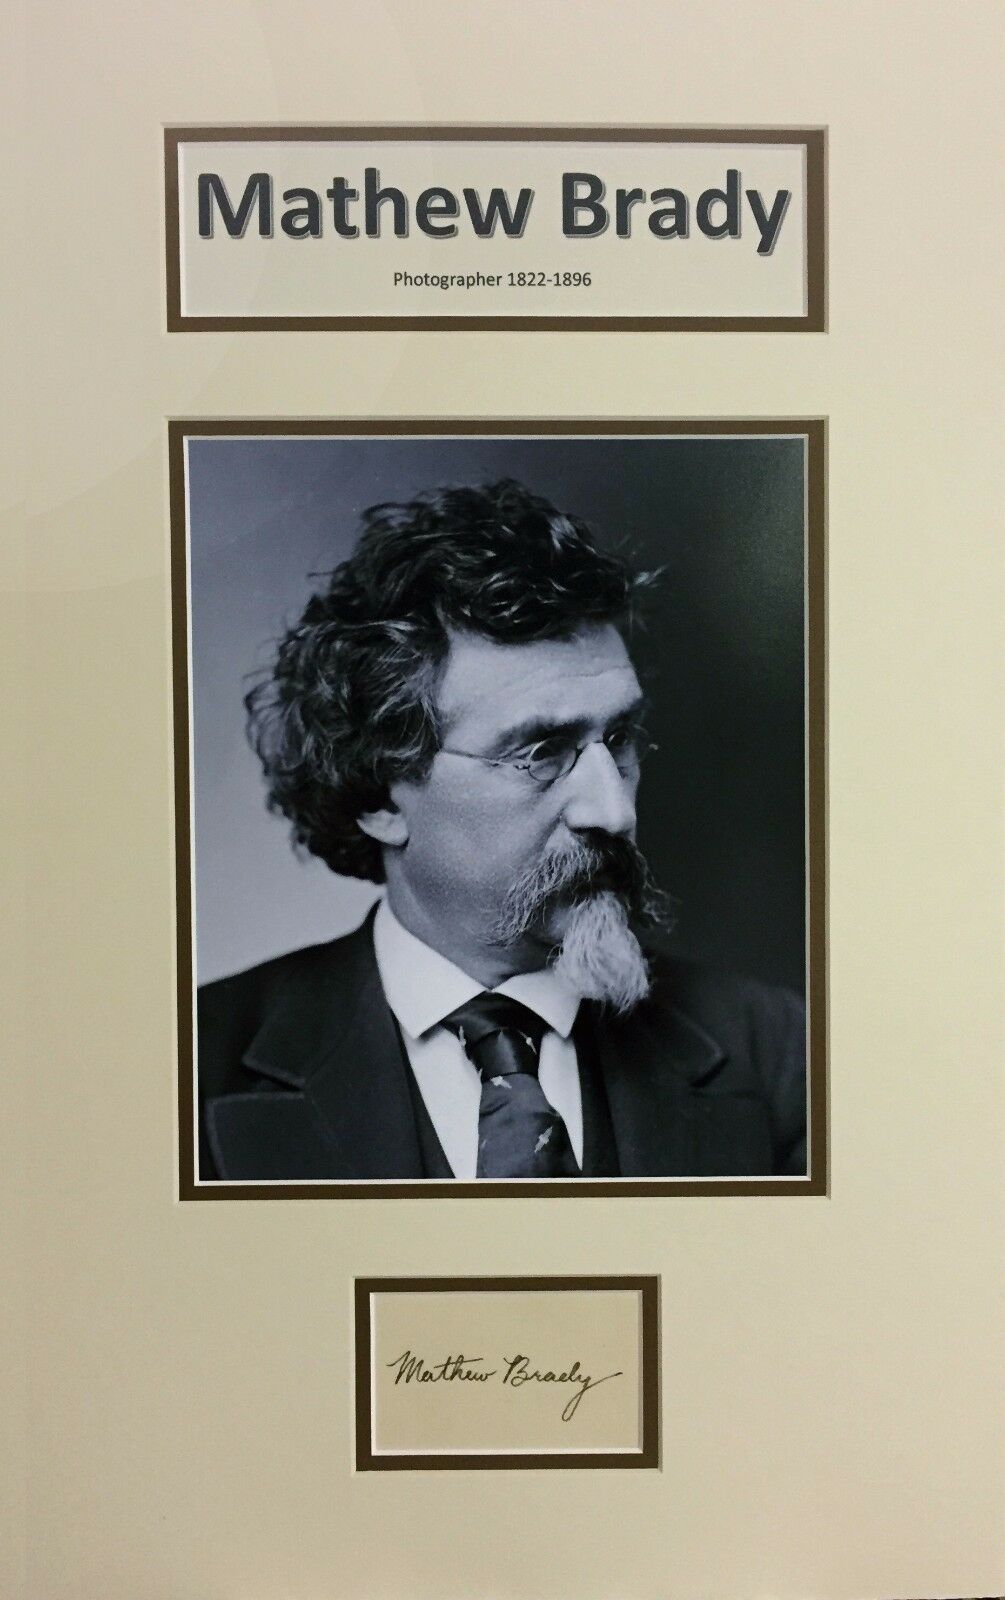 Primary image for Mathew Brady Original Autograph Cut framed ready to hang. Museum Standard Frame.